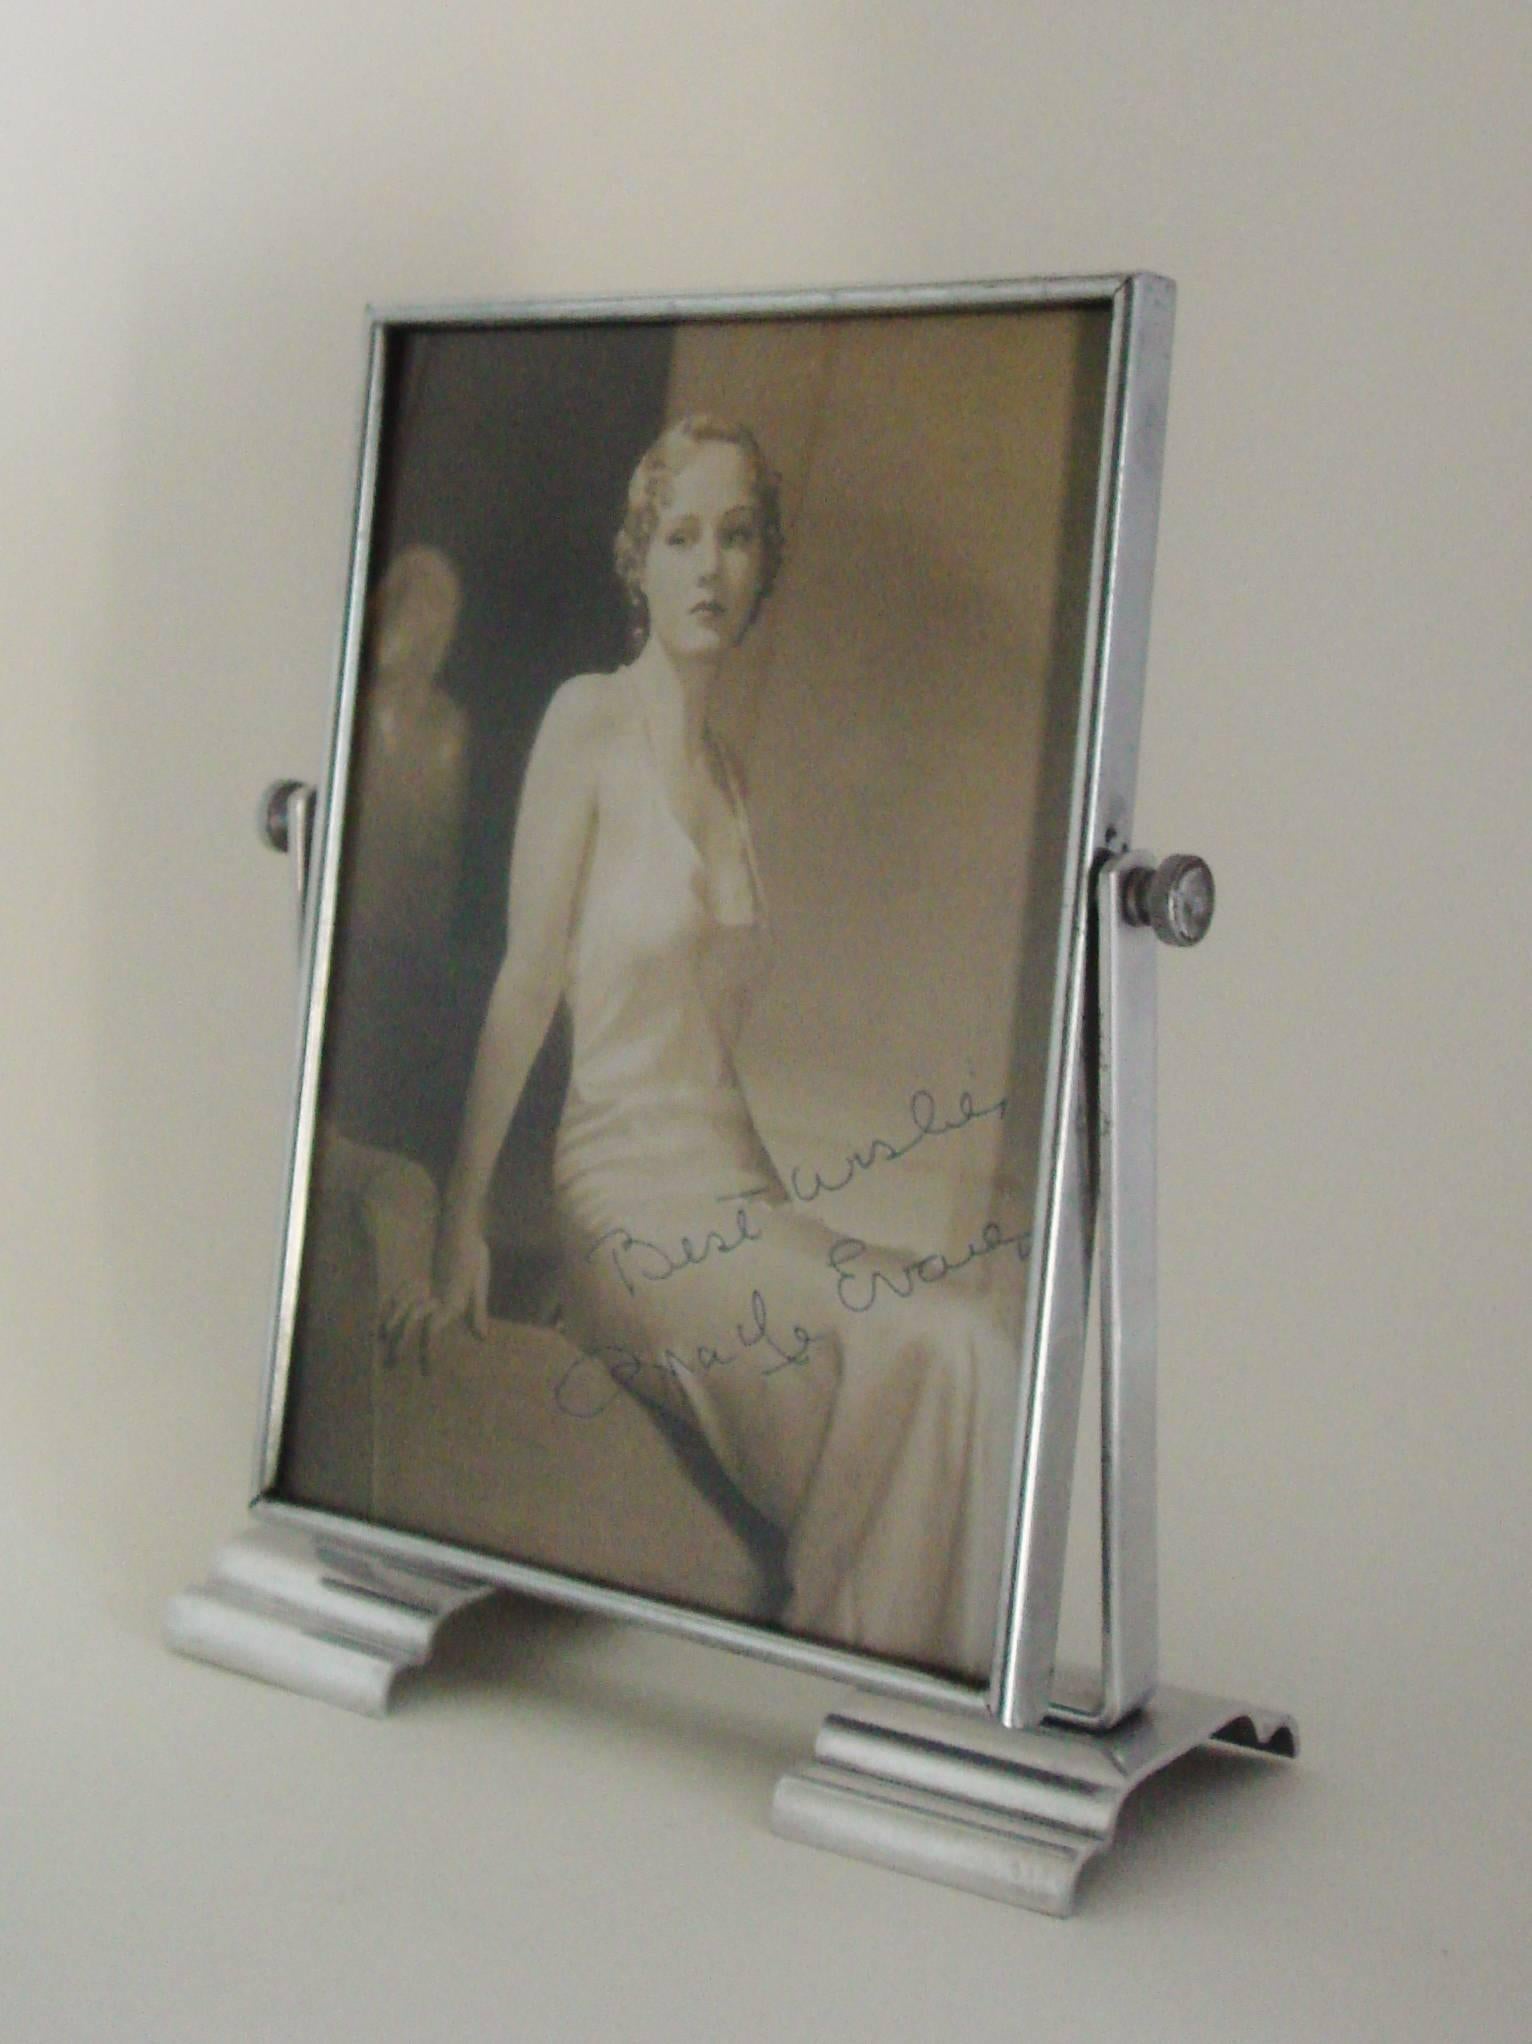 This English Art Deco adjustable photo frame features a polished aluminum base and bracket that holds a chrome-plated picture frame (8 in x 6 in image area). It stands on two polished chrome wave-form feet and has chrome bosses on either side with